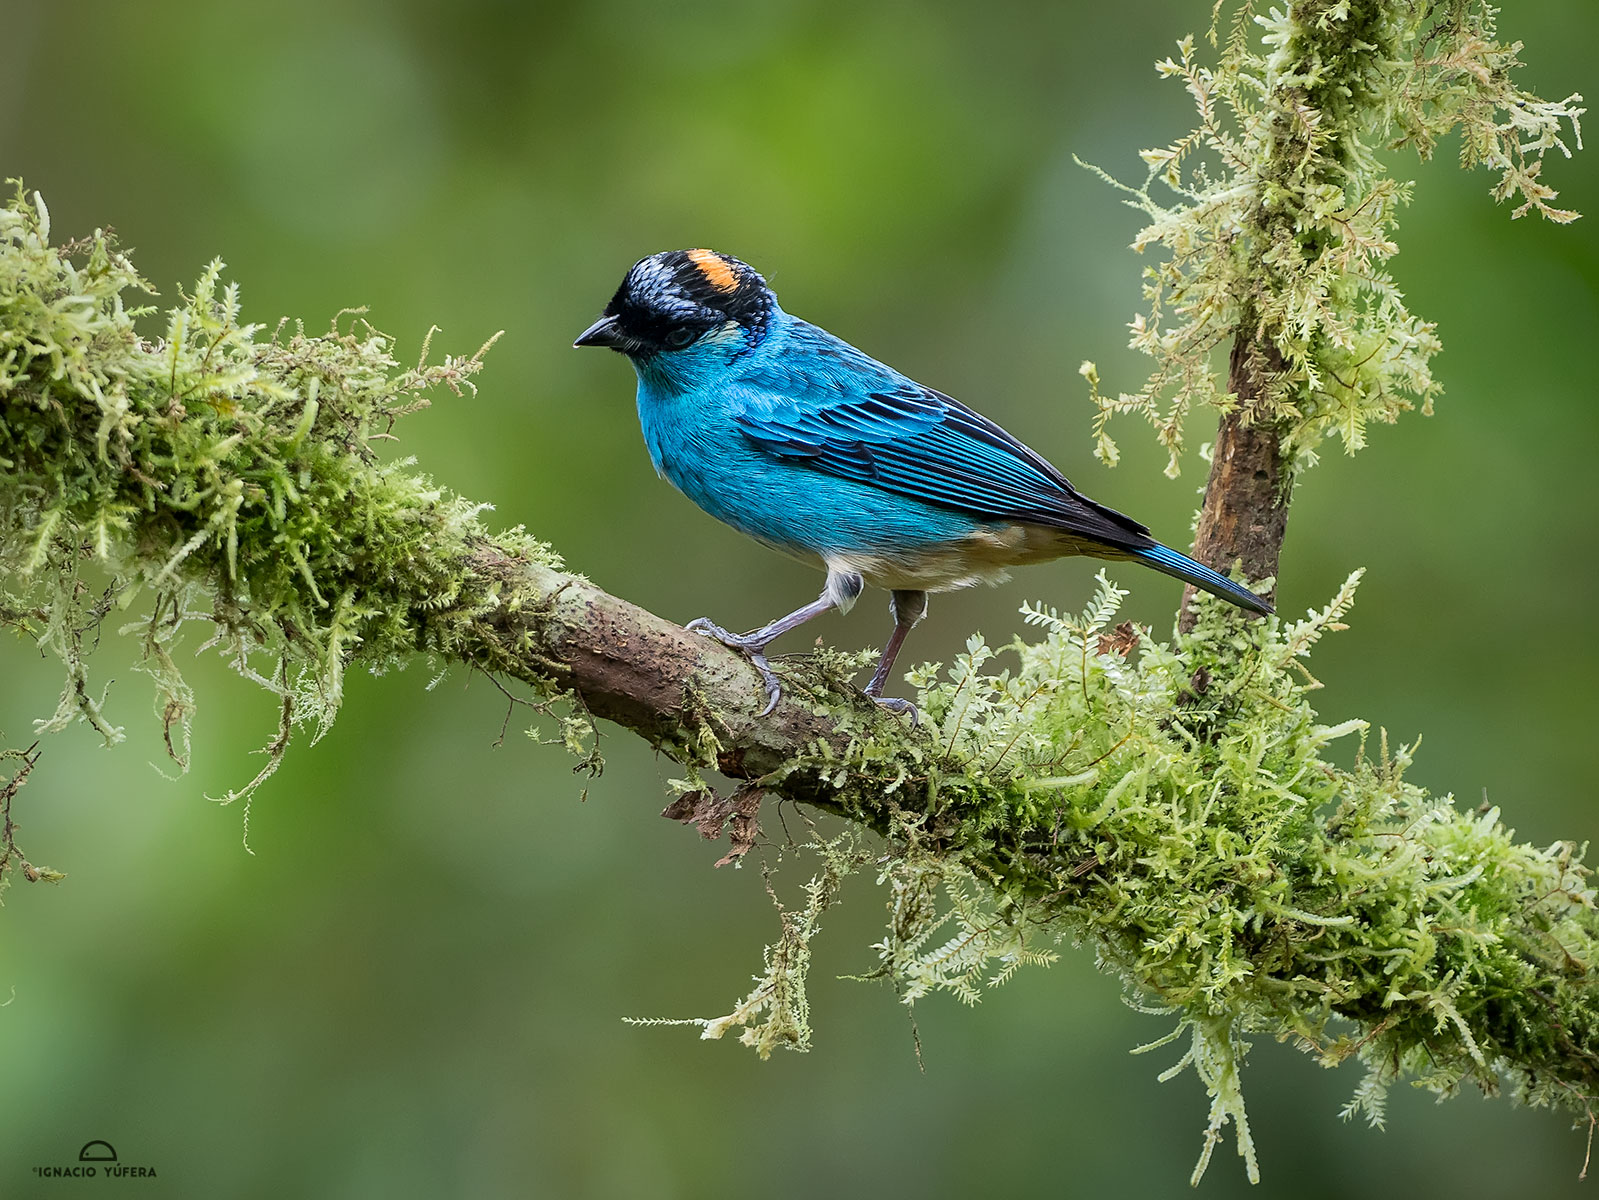 Golden-naped Tanager (Tangara ruficervix), Cauca Valley, Colombia